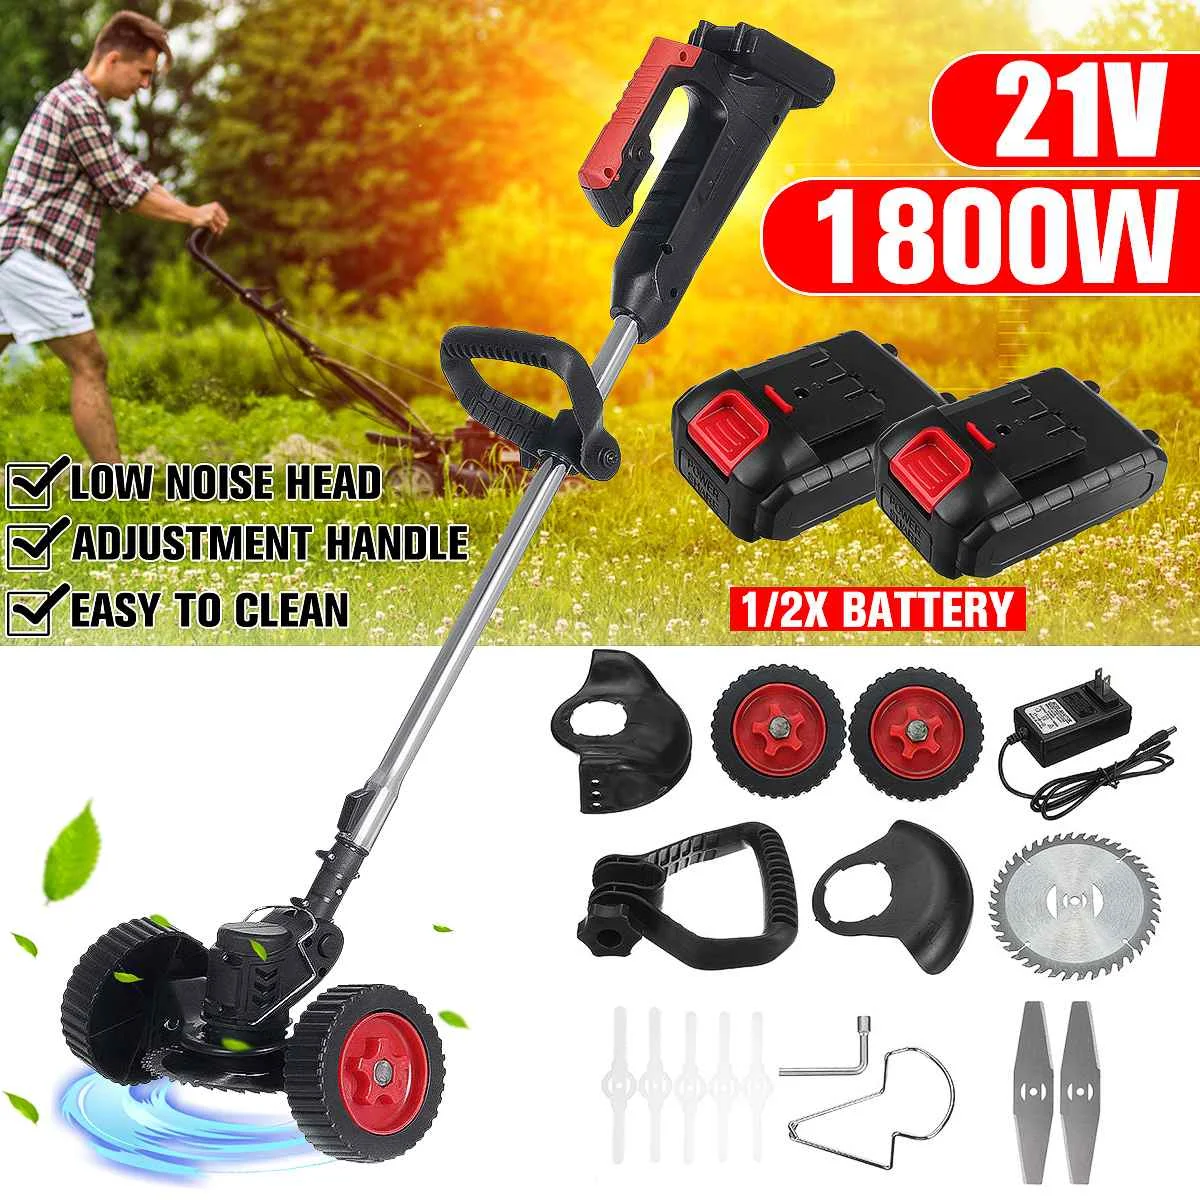 21V Electric Grass Trimmer With 1/2 13000mAh Li-ion Battery Cordless Lawn Mower Length Adjustable Garden Pruning Cutter Tools